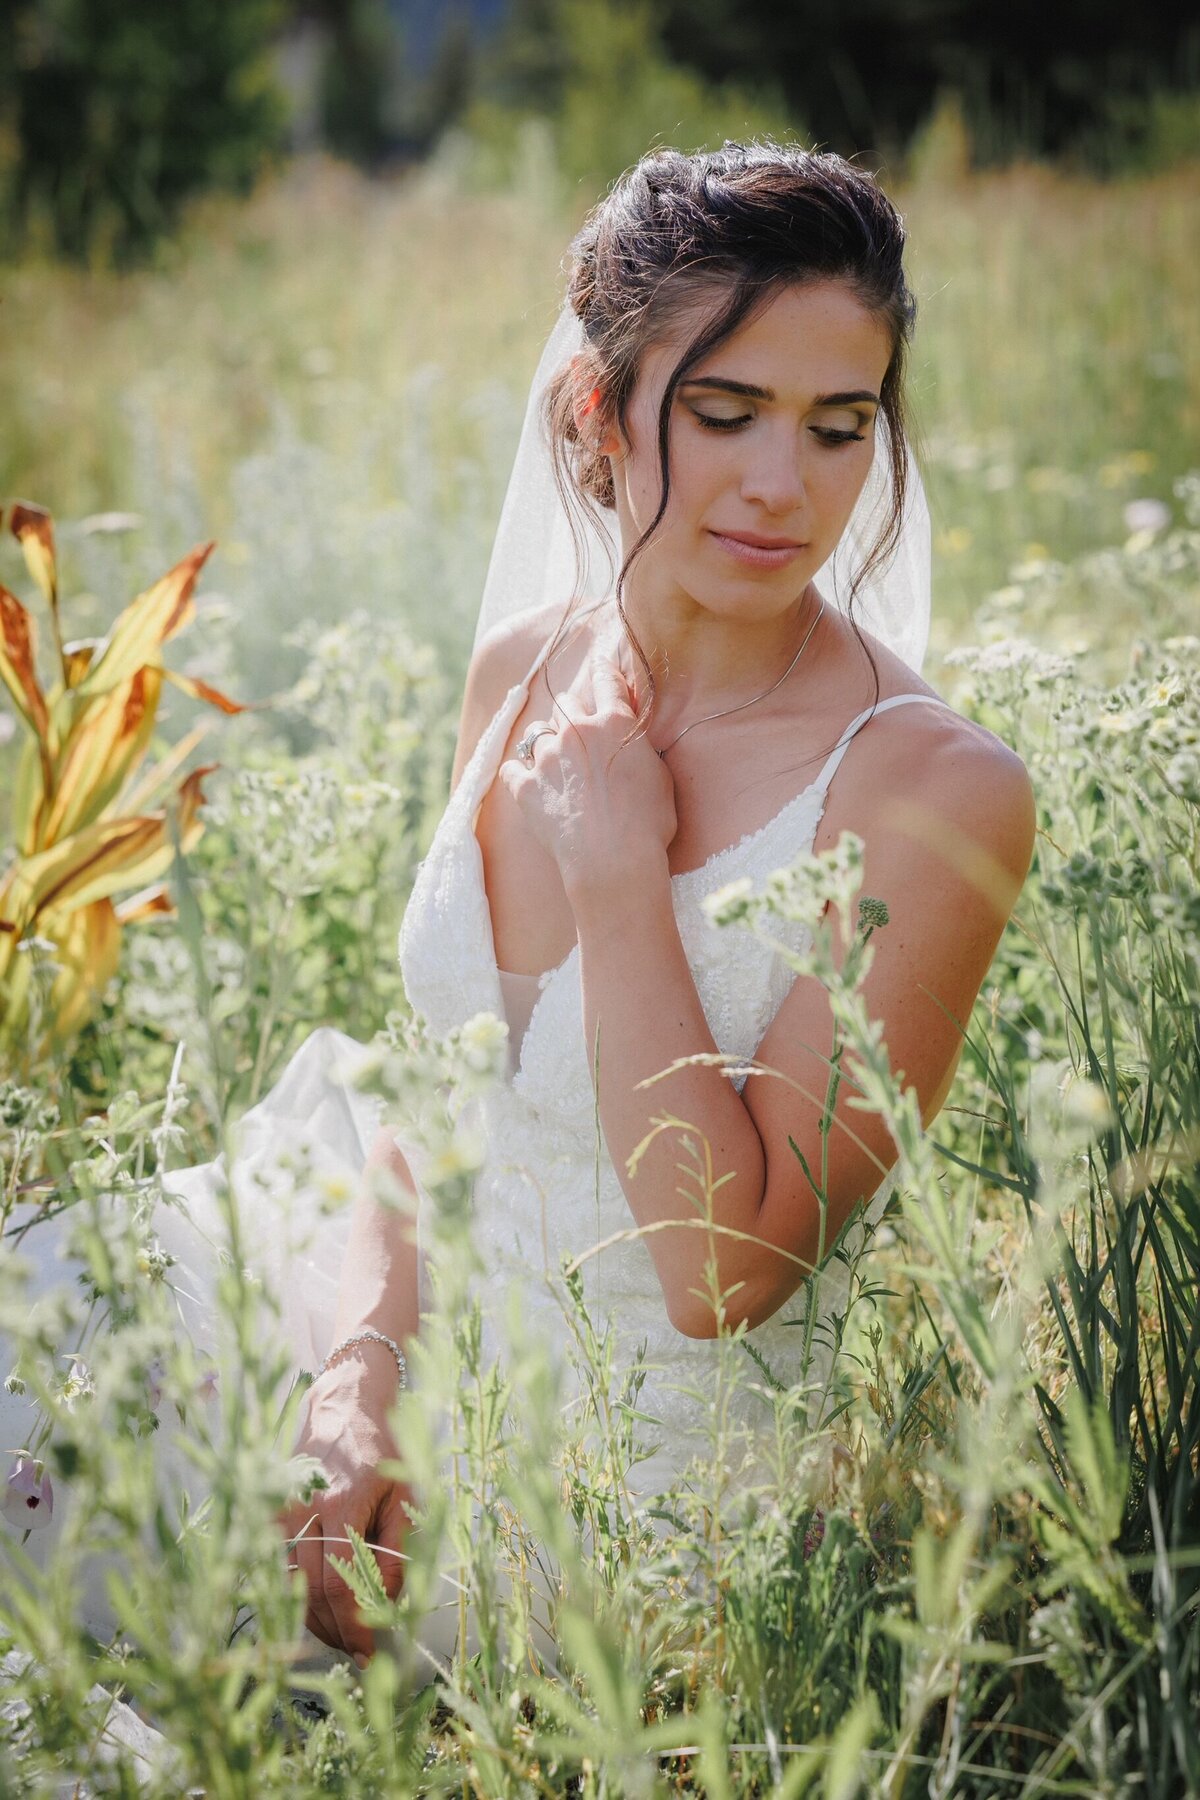 Stunning bride’s portrait in a field of flowers with her wedding dress.